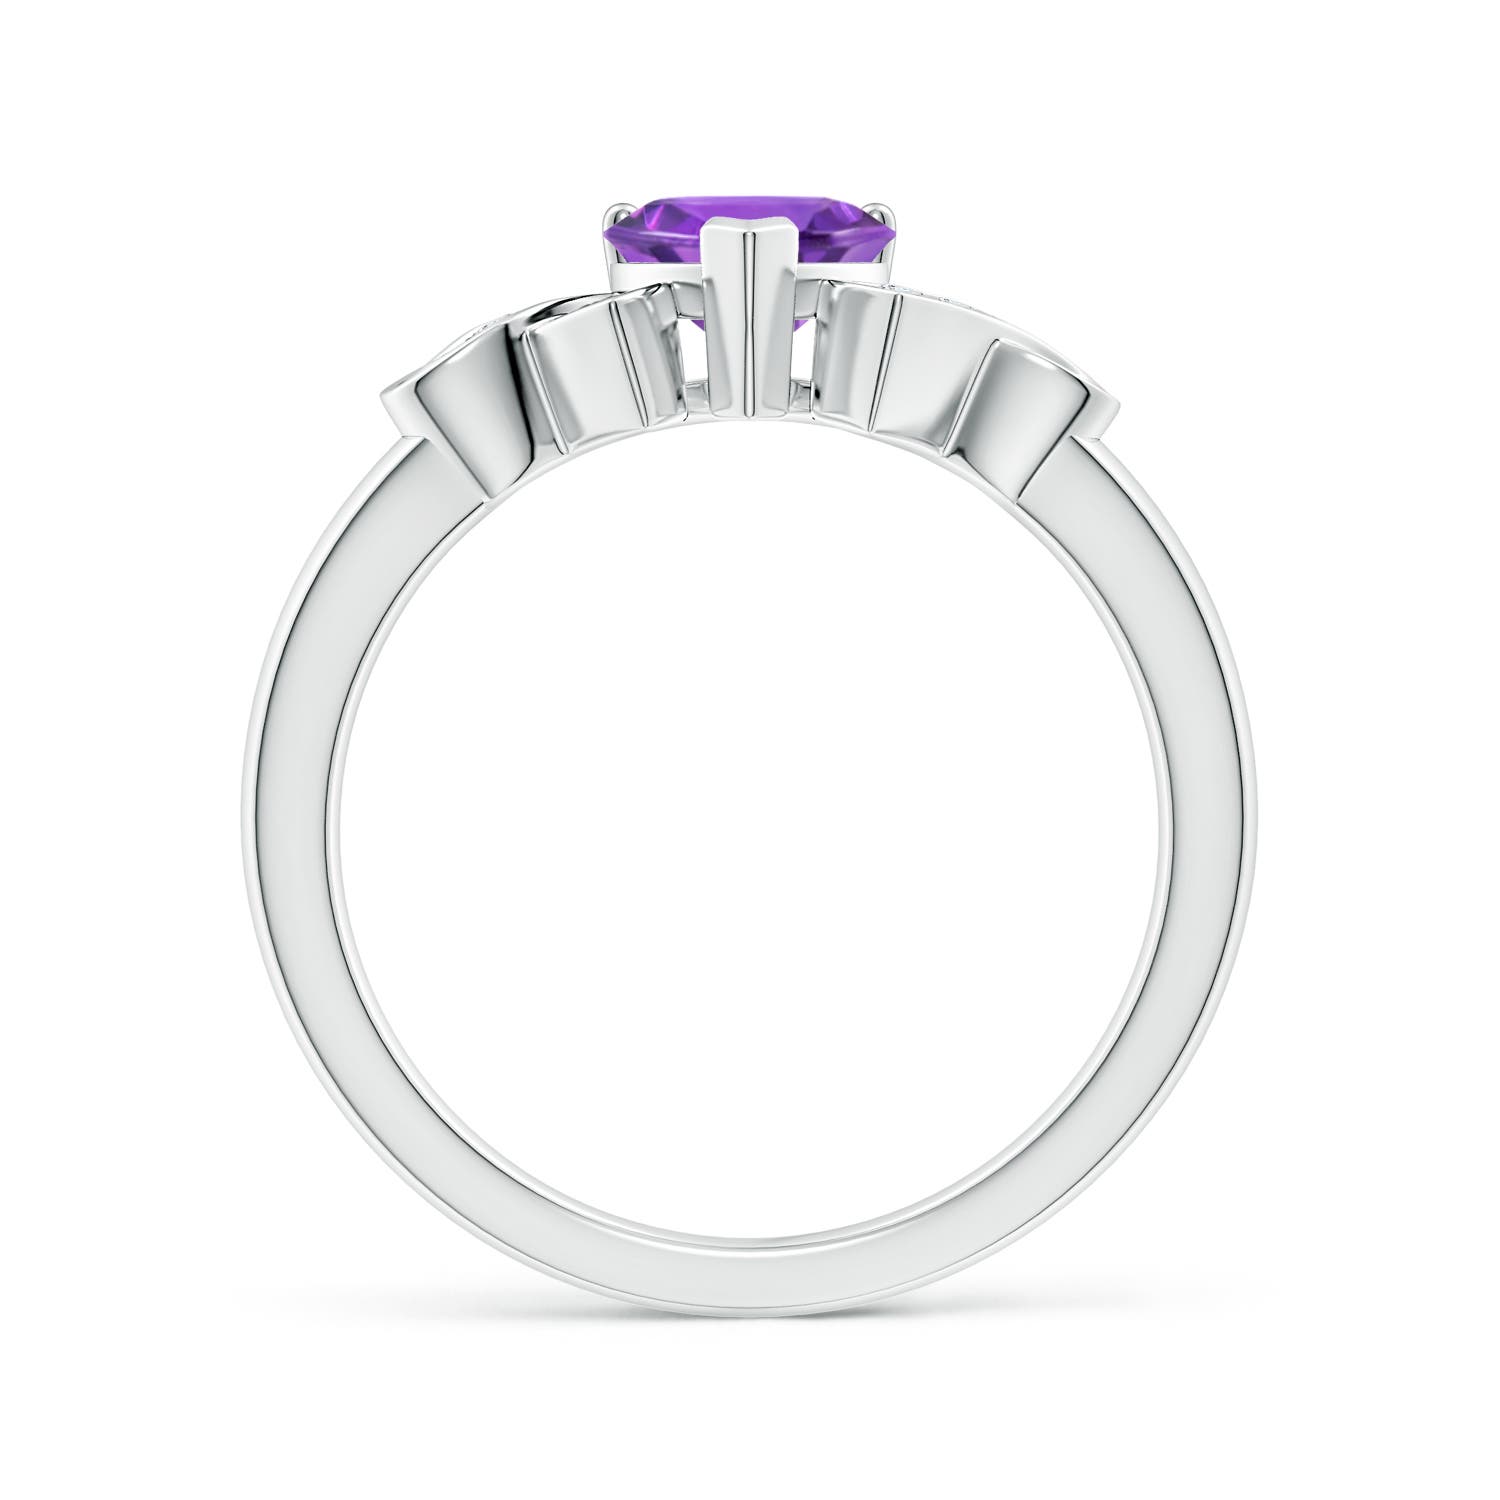 AAA - Amethyst / 0.76 CT / 14 KT White Gold